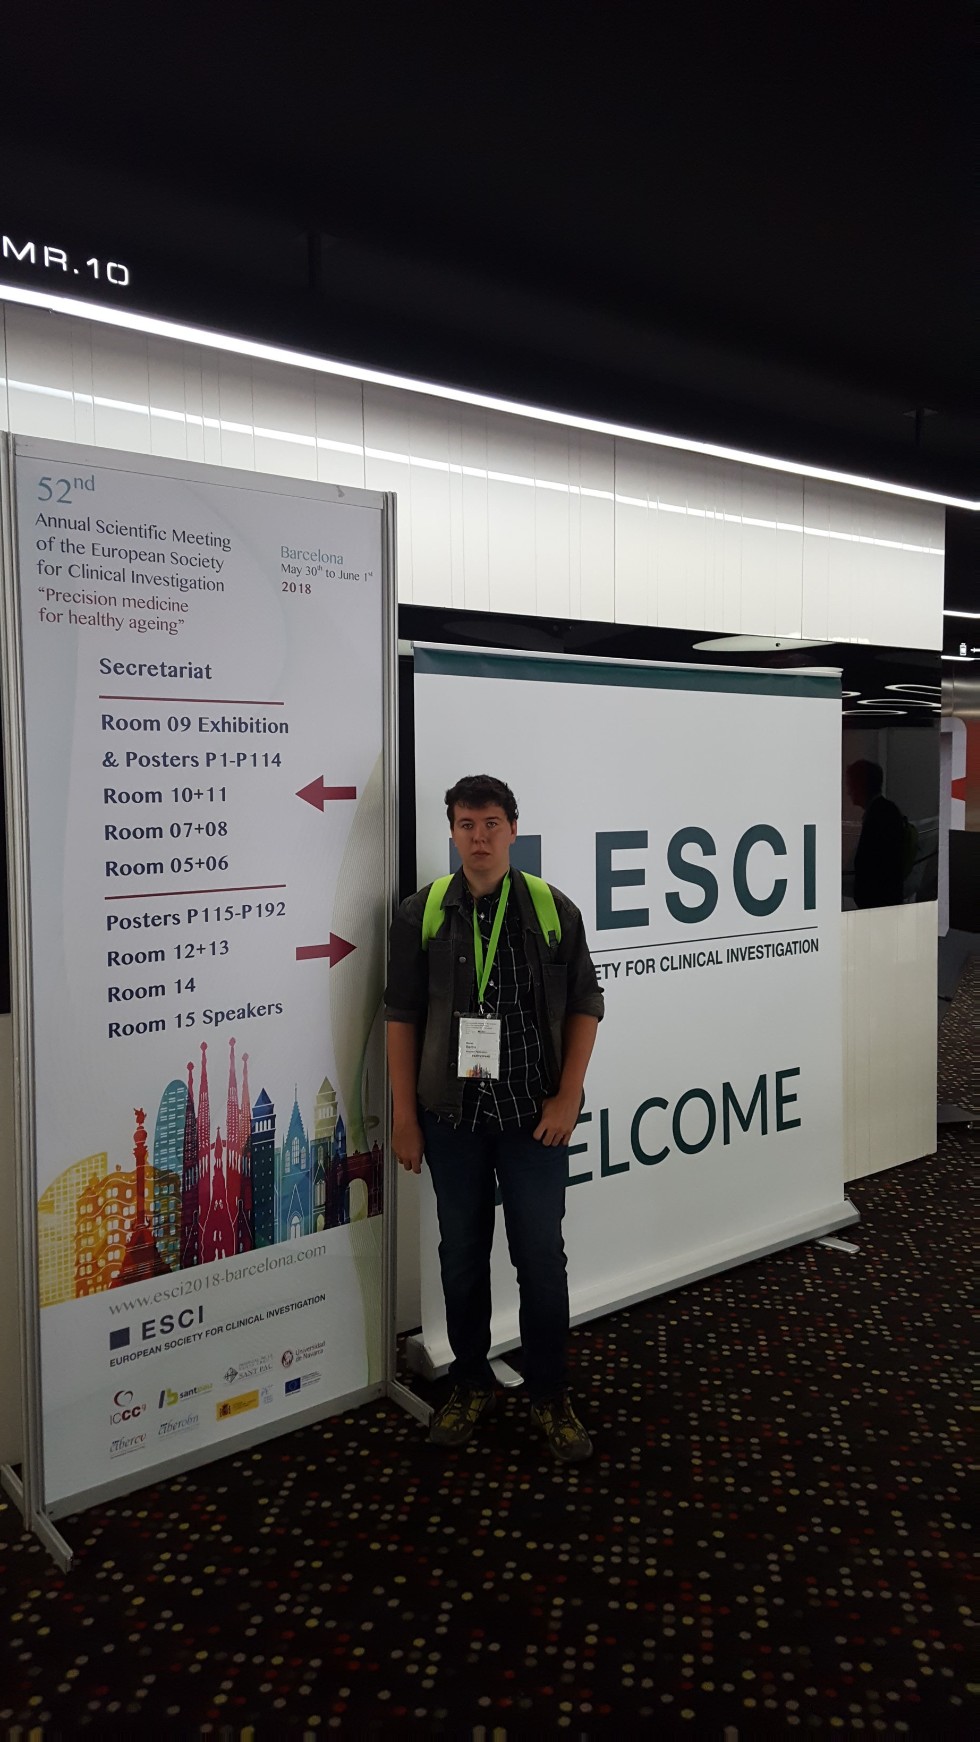 52nd ESCI Annual Scientific Meeting of the European Society for Clinical Investigation 30 May-1 June Barcelona, Spain